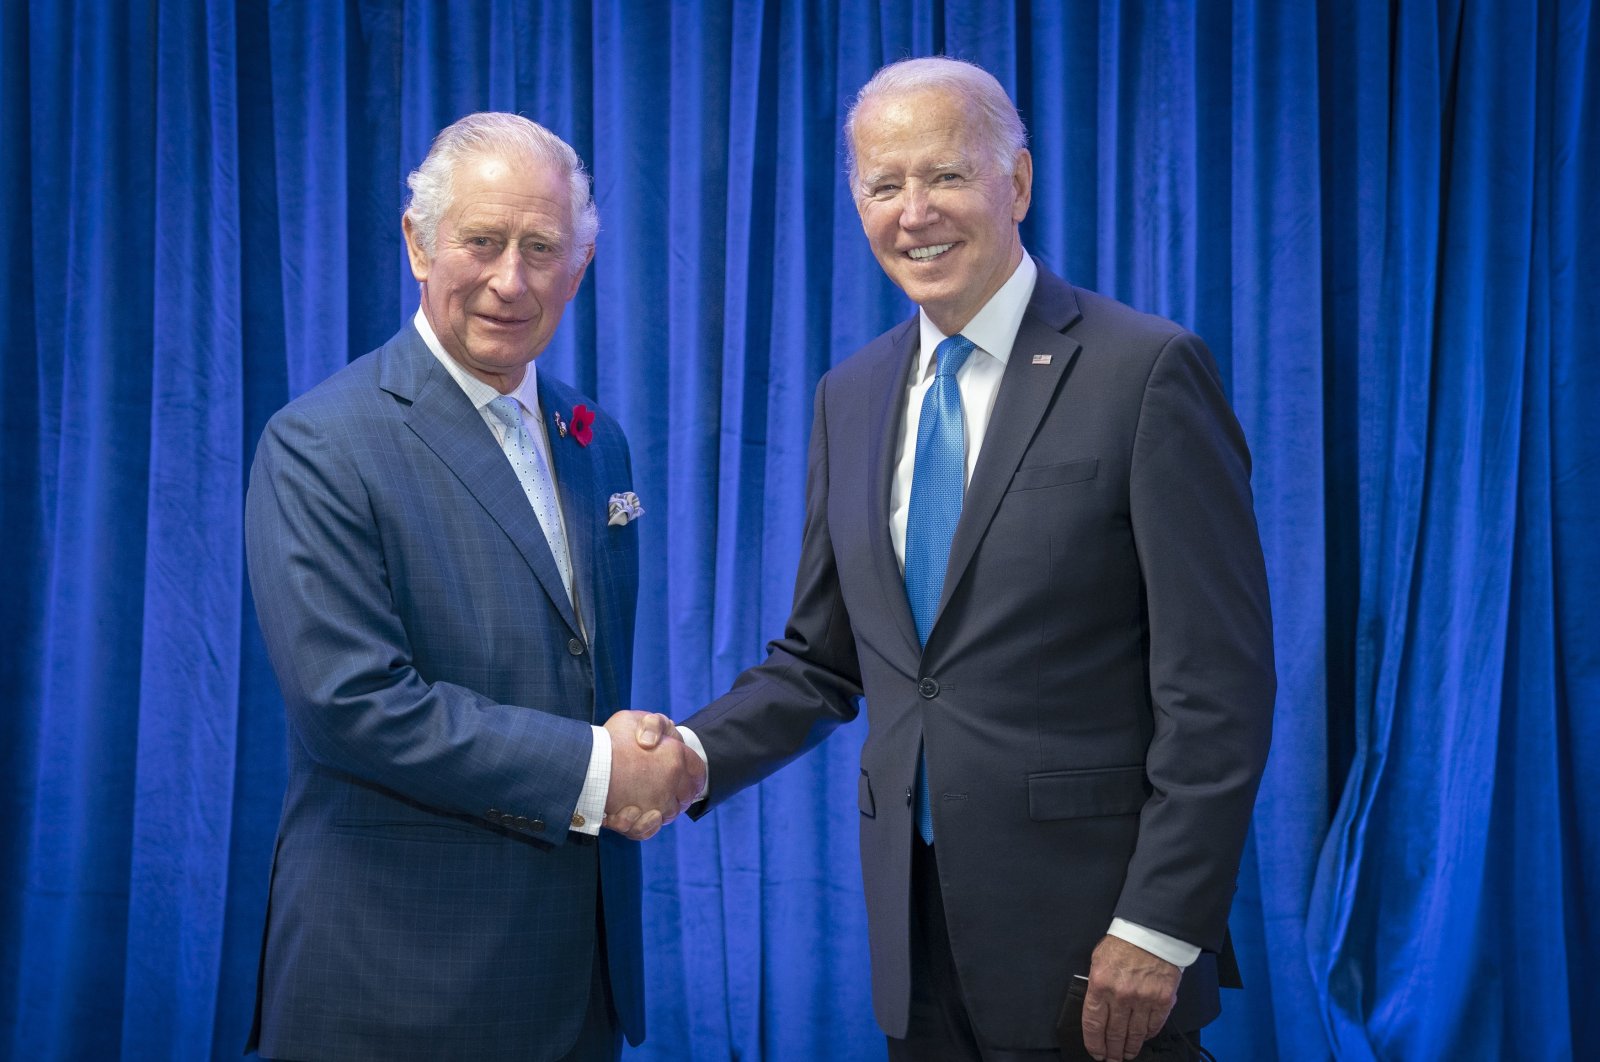 Britain&#039;s Prince Charles (L), greets the President Joe Biden ahead of their bilateral meeting during the COP26 summit at the Scottish Event Campus (SEC) in Glasgow, Scotland, Nov. 2, 2021. (AP Photo)